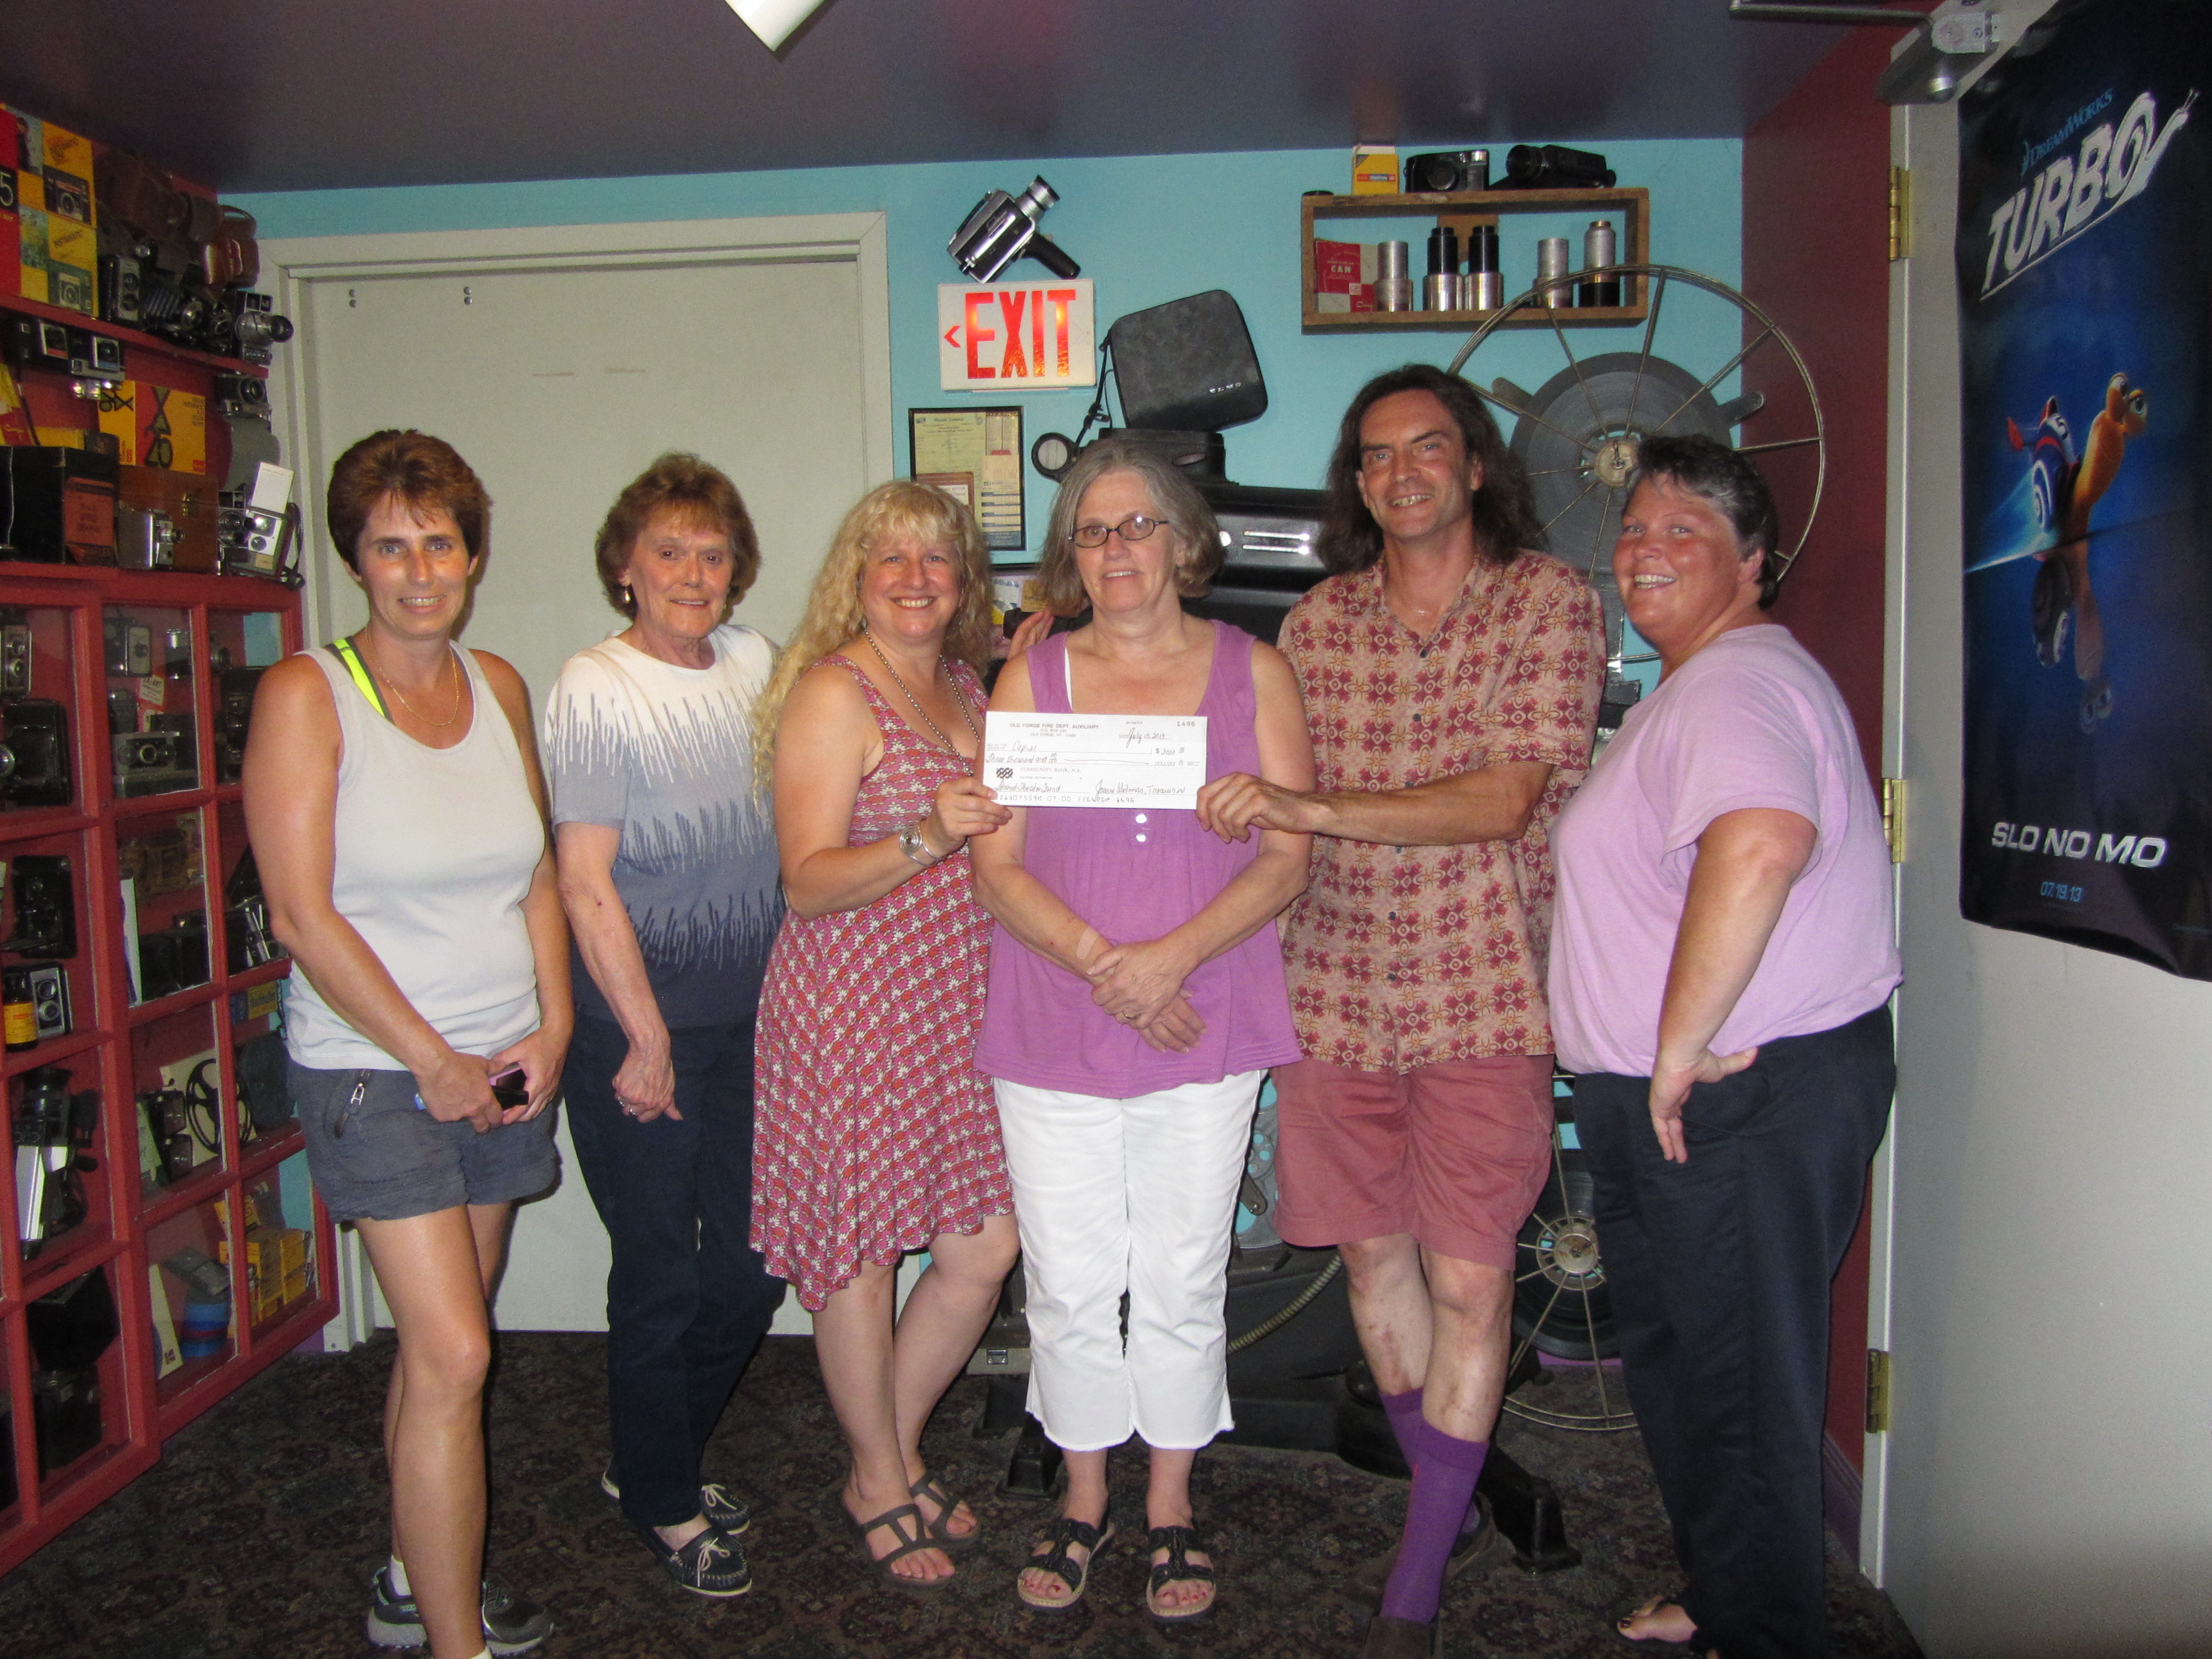 Strand owners Helen Zyma, third from left, and Bob Card received a $3,000 donation for the theater's digital converstion from Old Forge Fire Dept. Auxiliary member Carol Perkins, Joanne Widman, Jane Tormey and Barb Winslow. Photo by Gina Greco